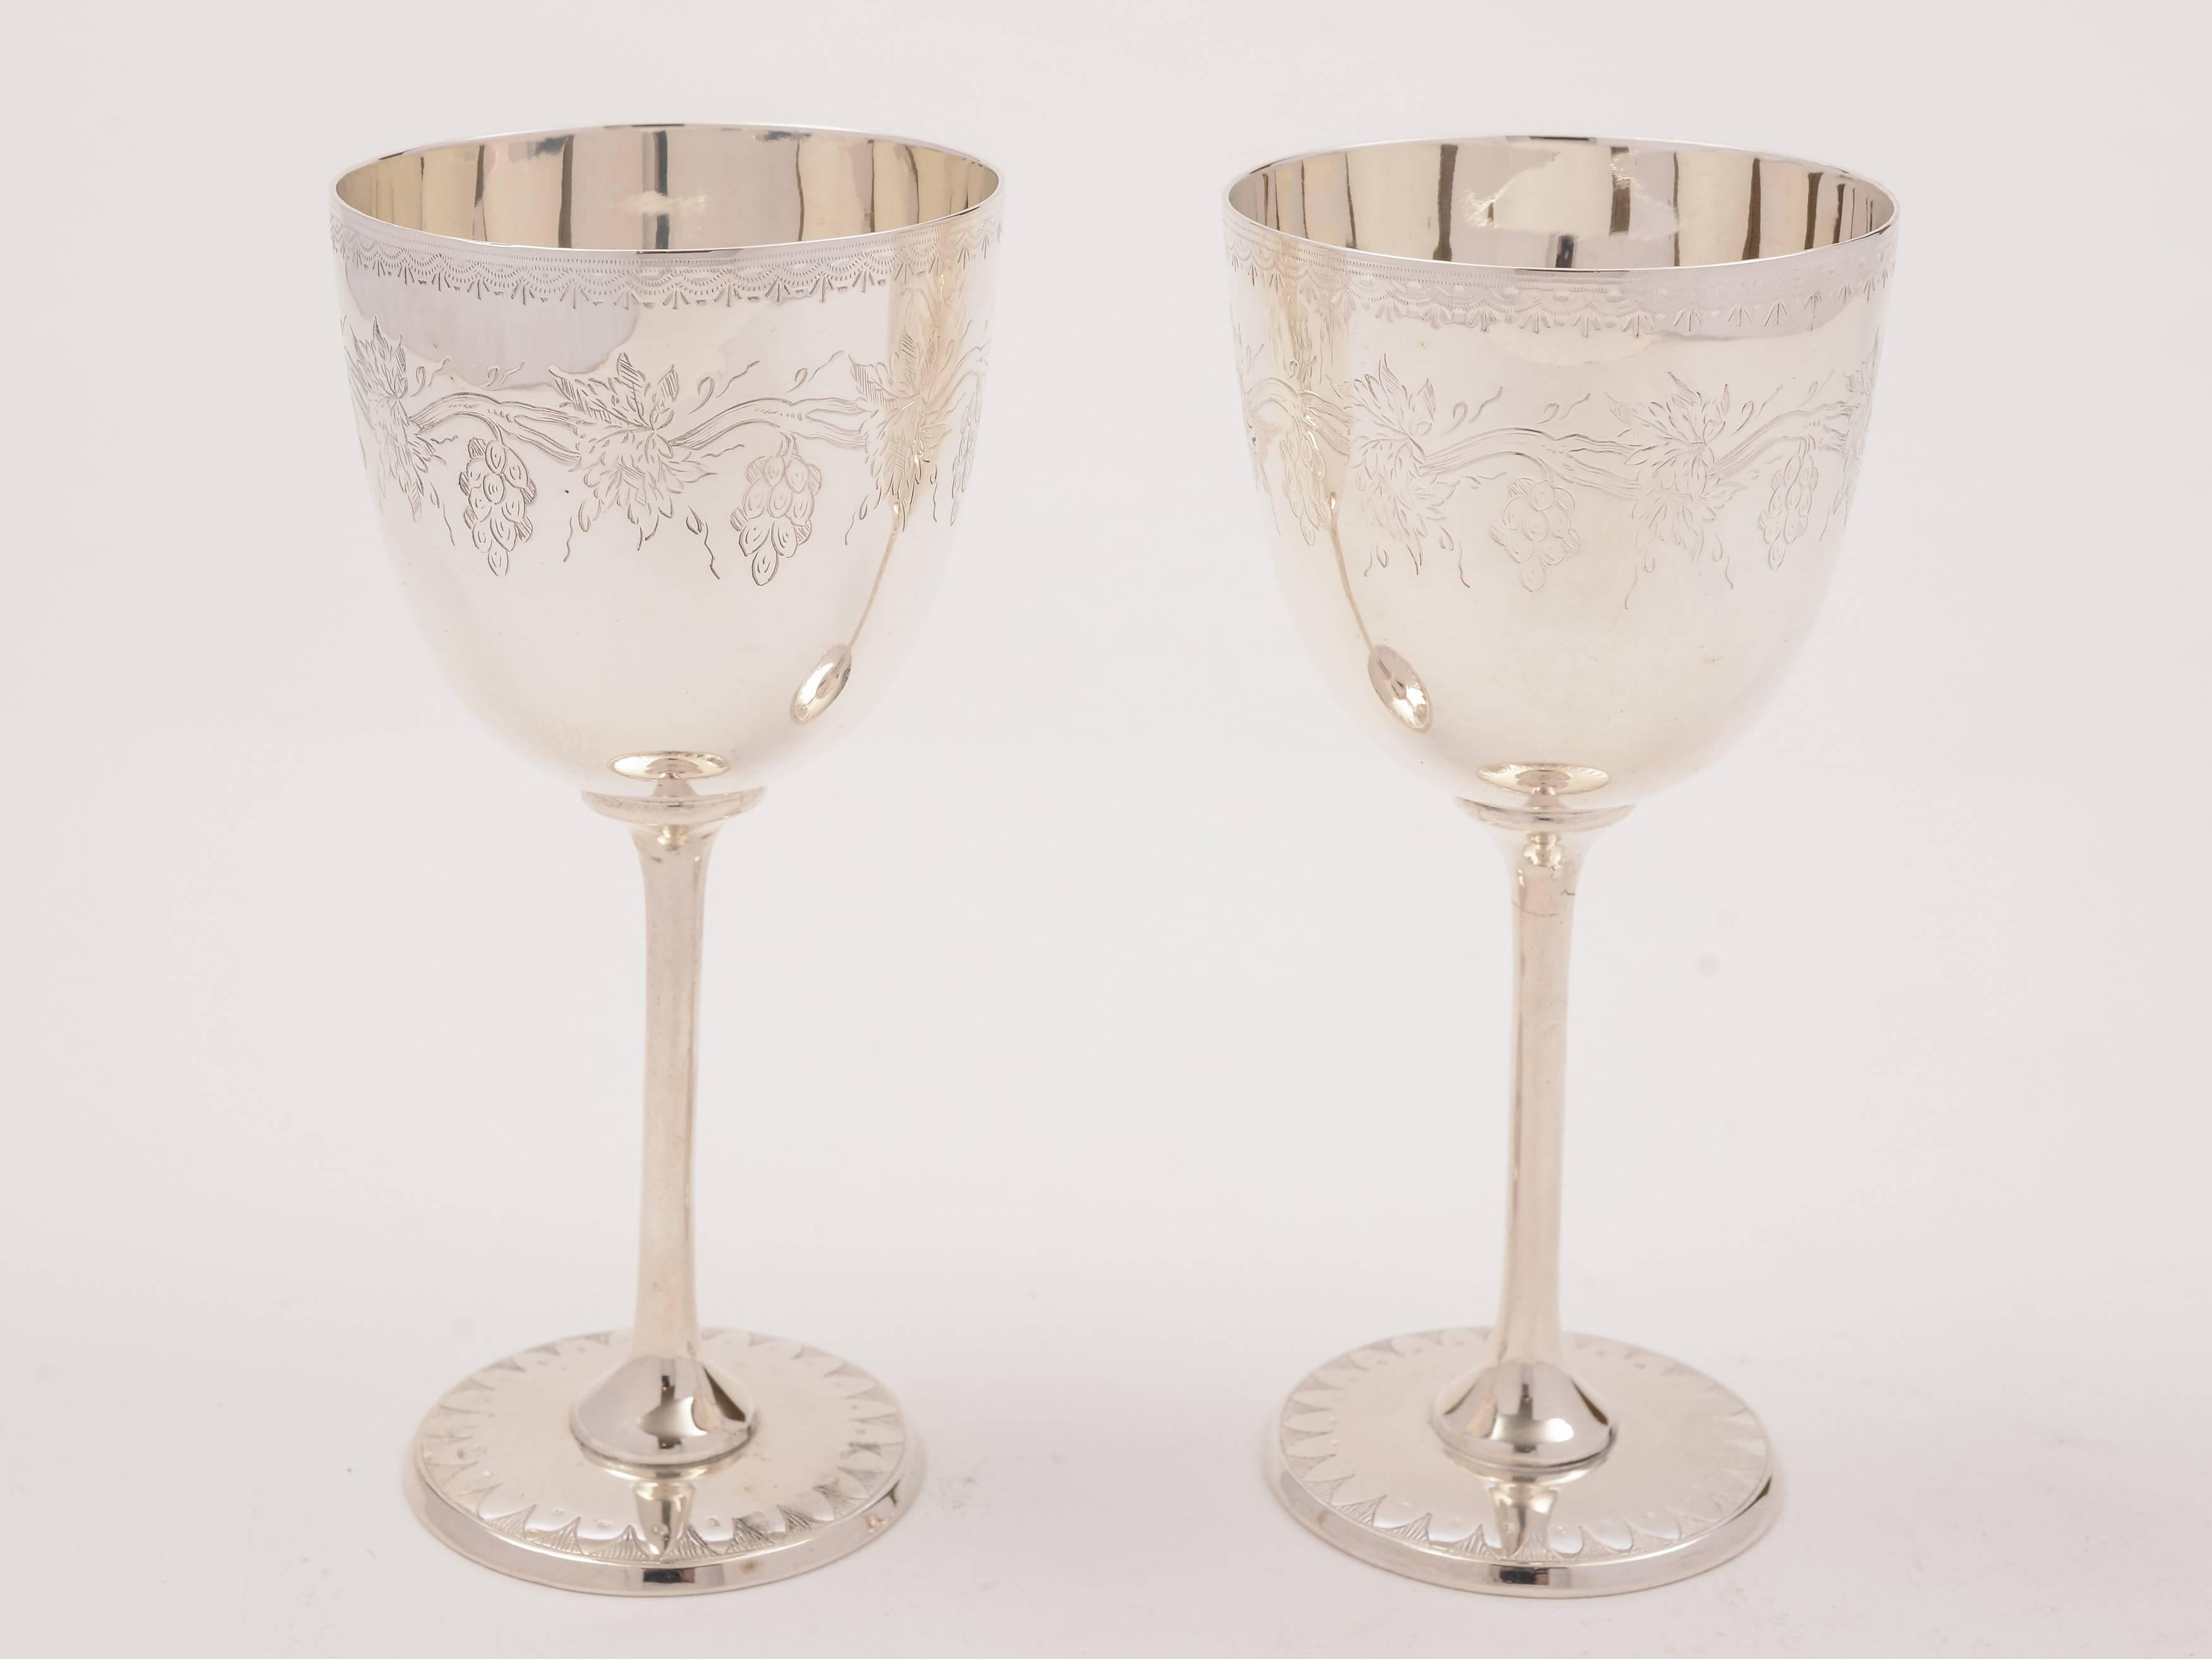 A lovely pair of English Victorian silver plated wine goblets with engraved vine and grape decoration and lion family crest to front, circa 1890.

Total weight: 260g.
   